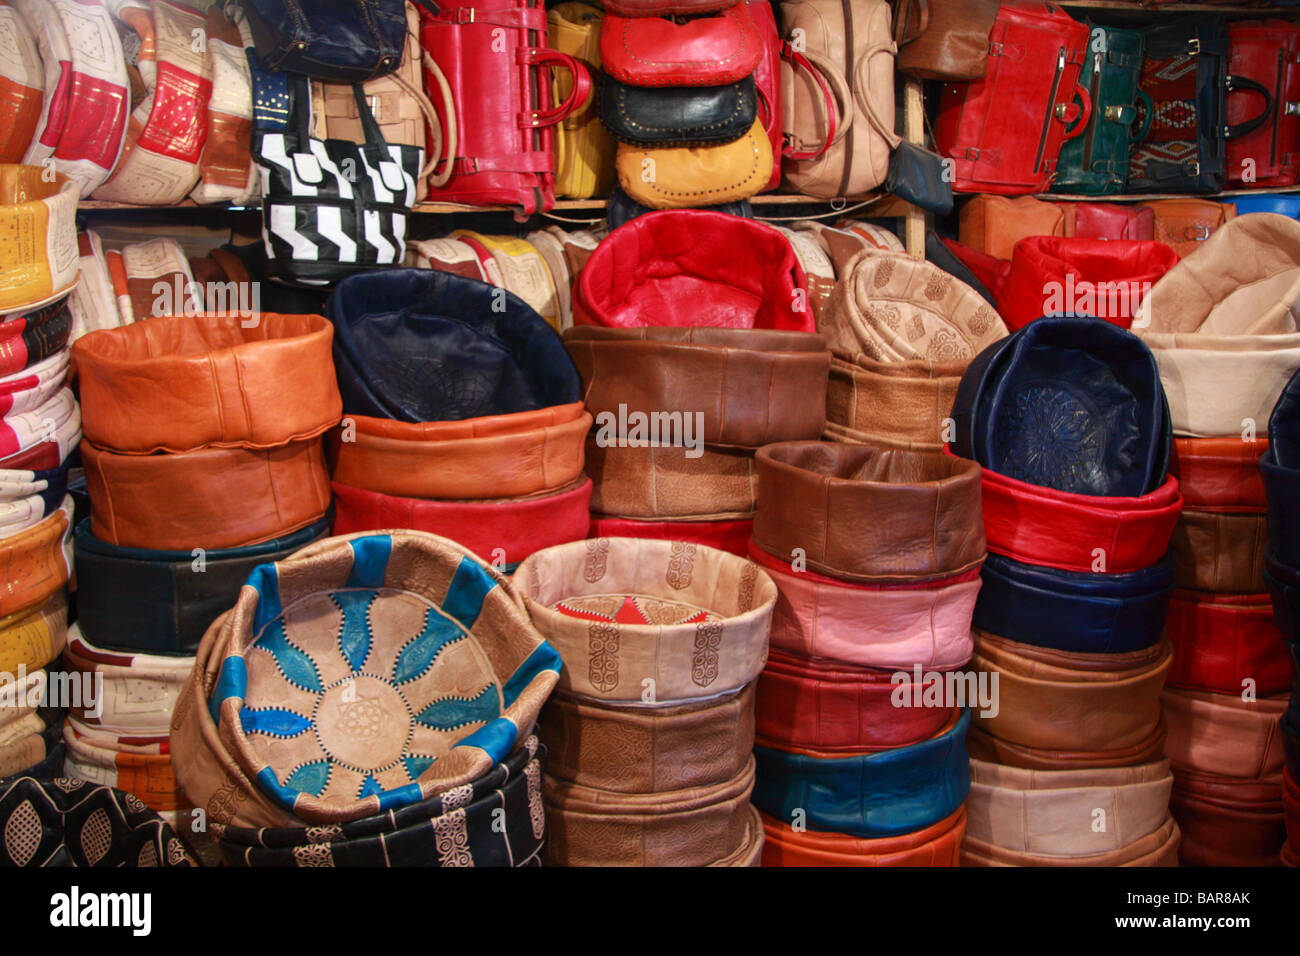 Traditional Moroccan leather pouffes/soft seats & bags for sale in  a tannery shop deep in the depths of Fes/Fez medina, Morocco Stock Photo